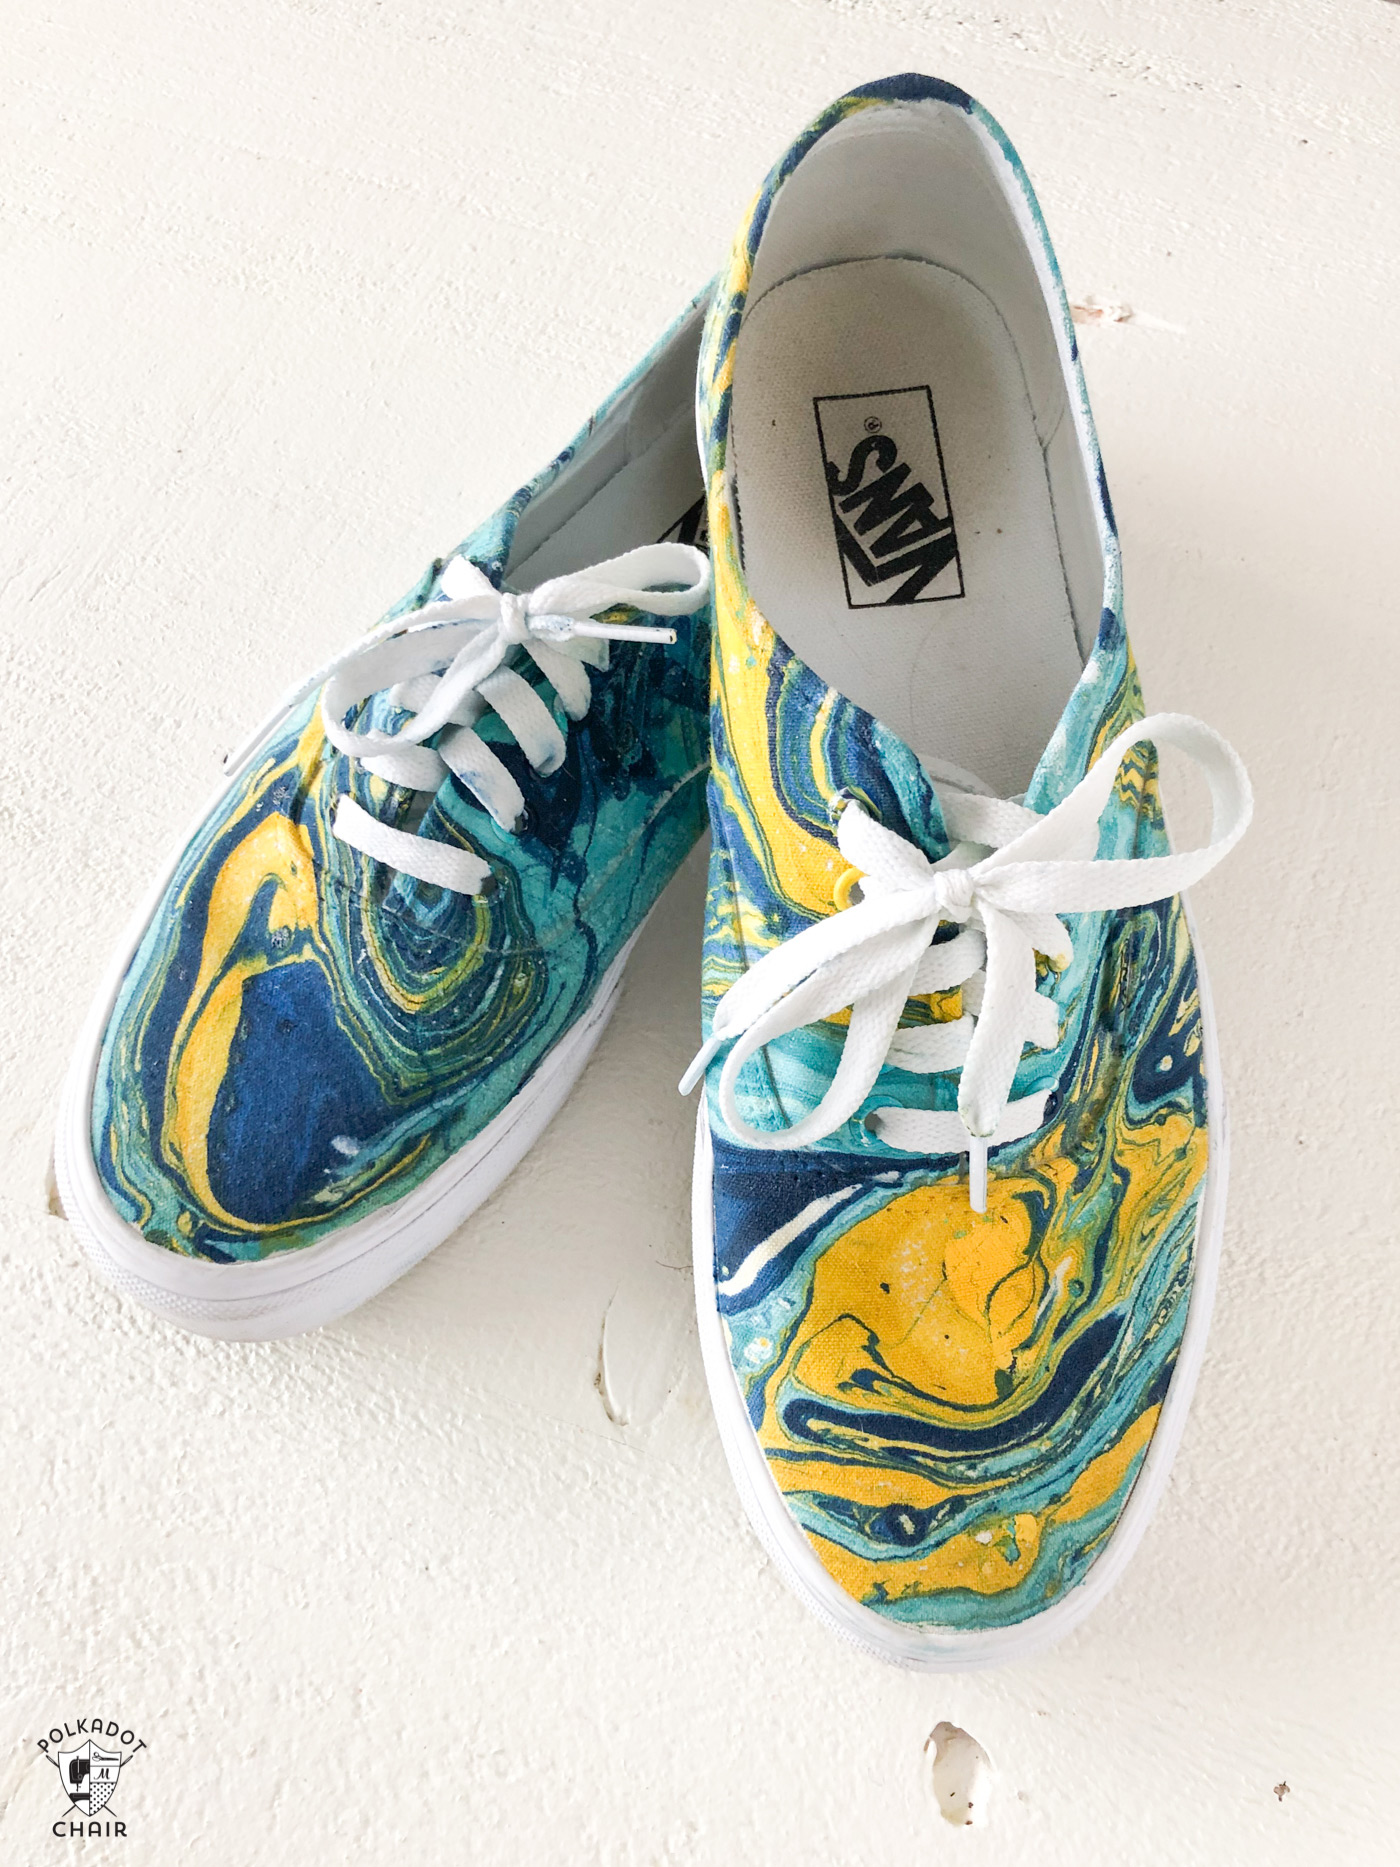 blue, yellow and aqua hydro dipped vans on white table